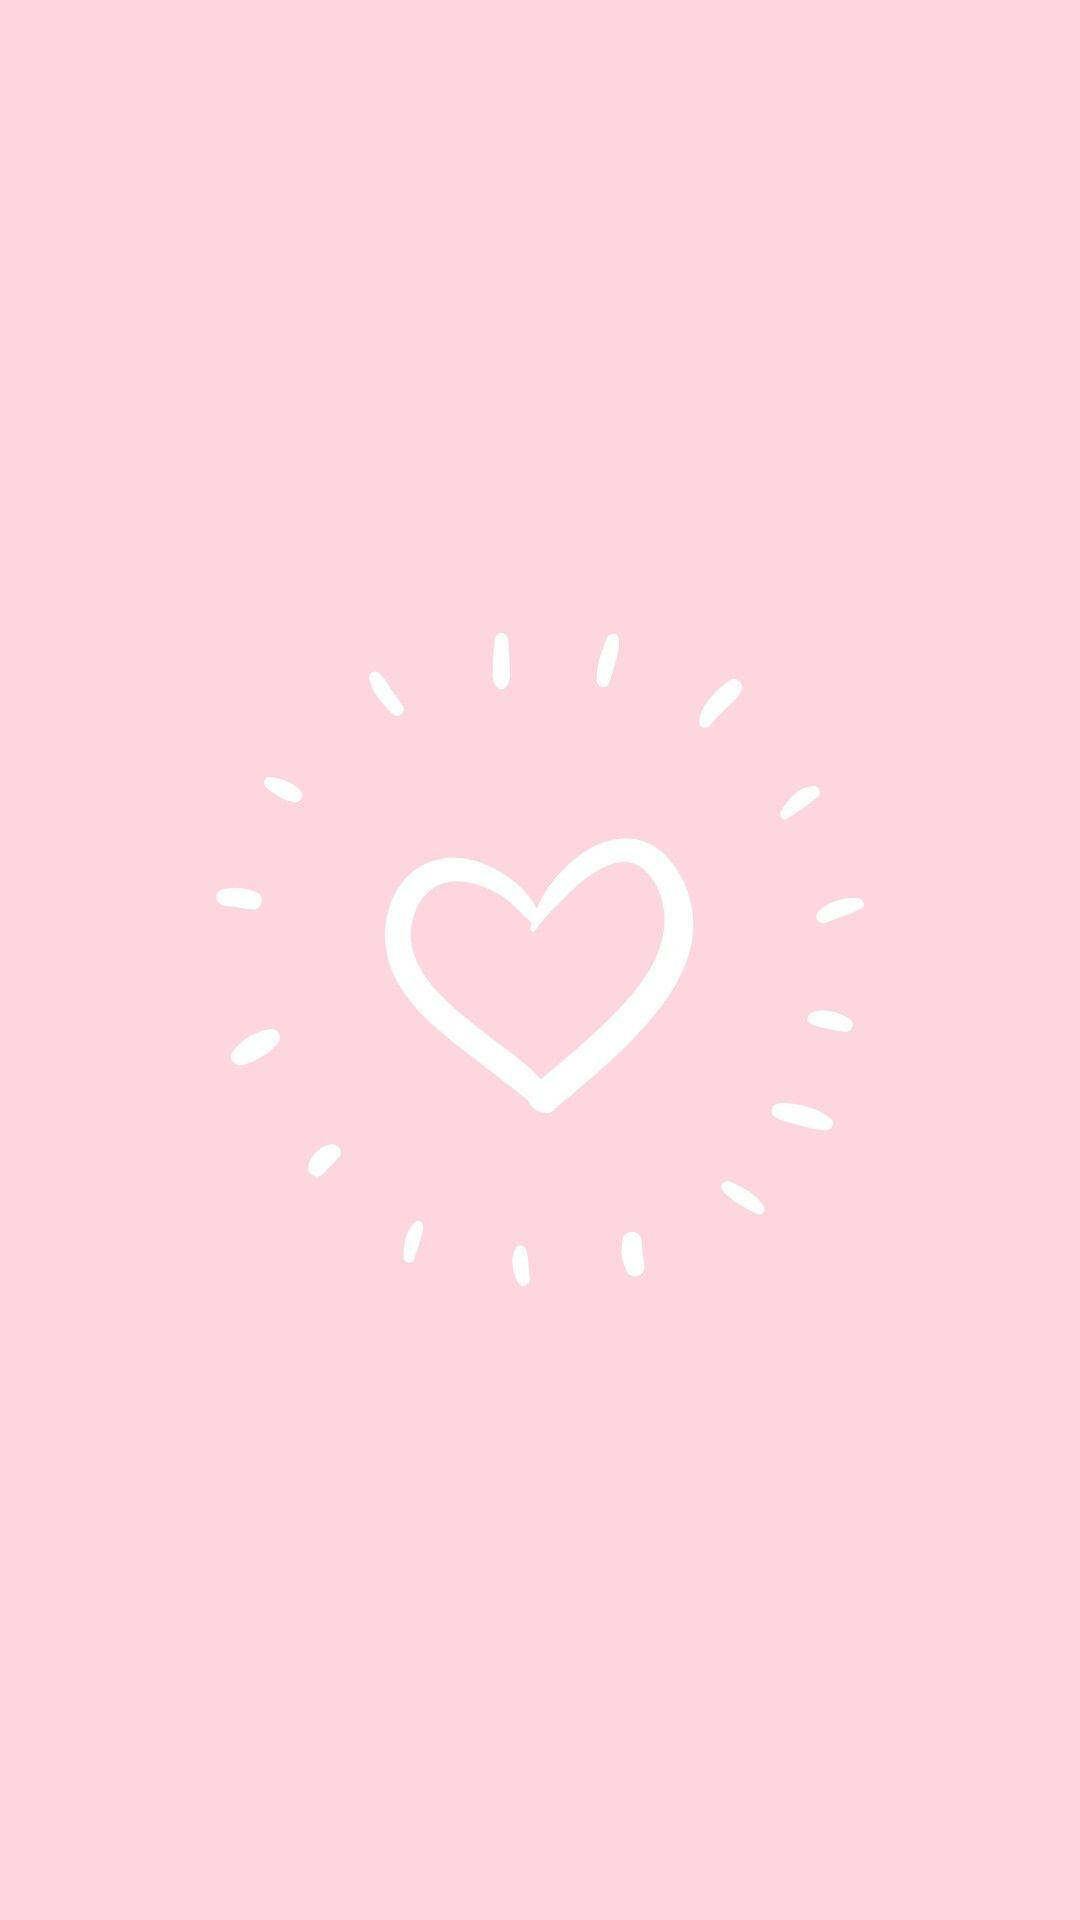 Pastel Pink Heart With Rays Phone Wallpaper